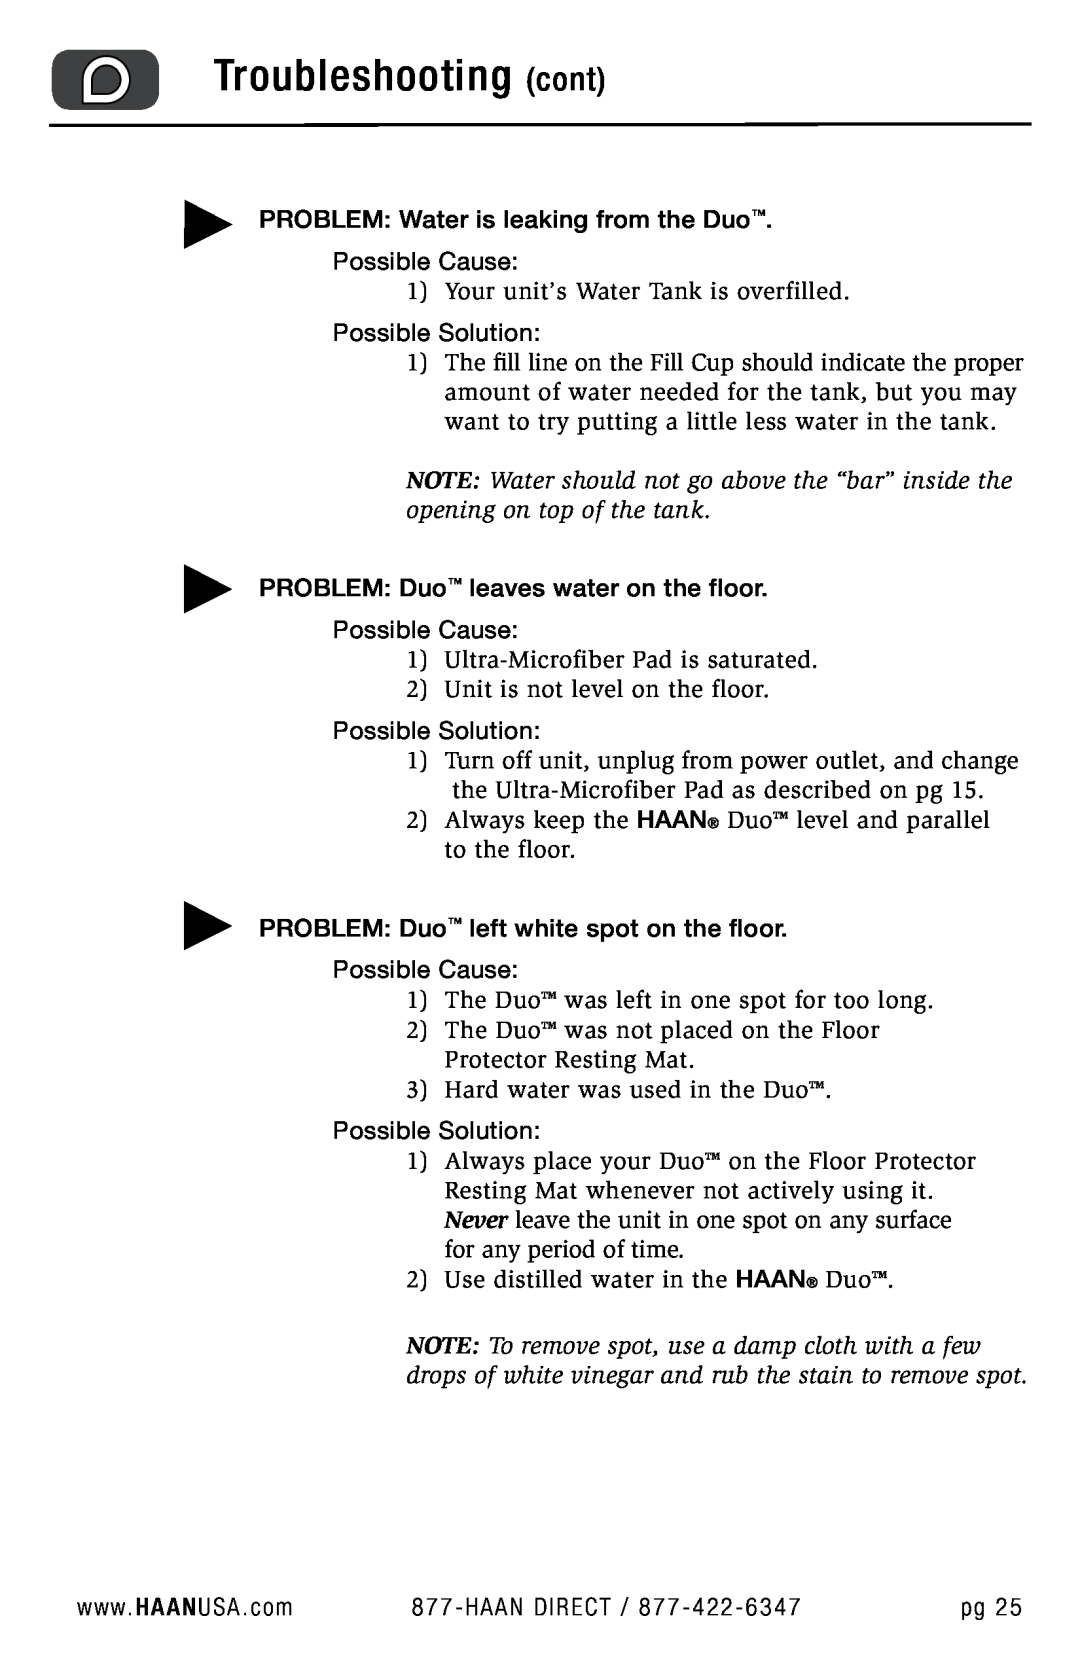 Haan HD-50 user manual Troubleshooting cont 